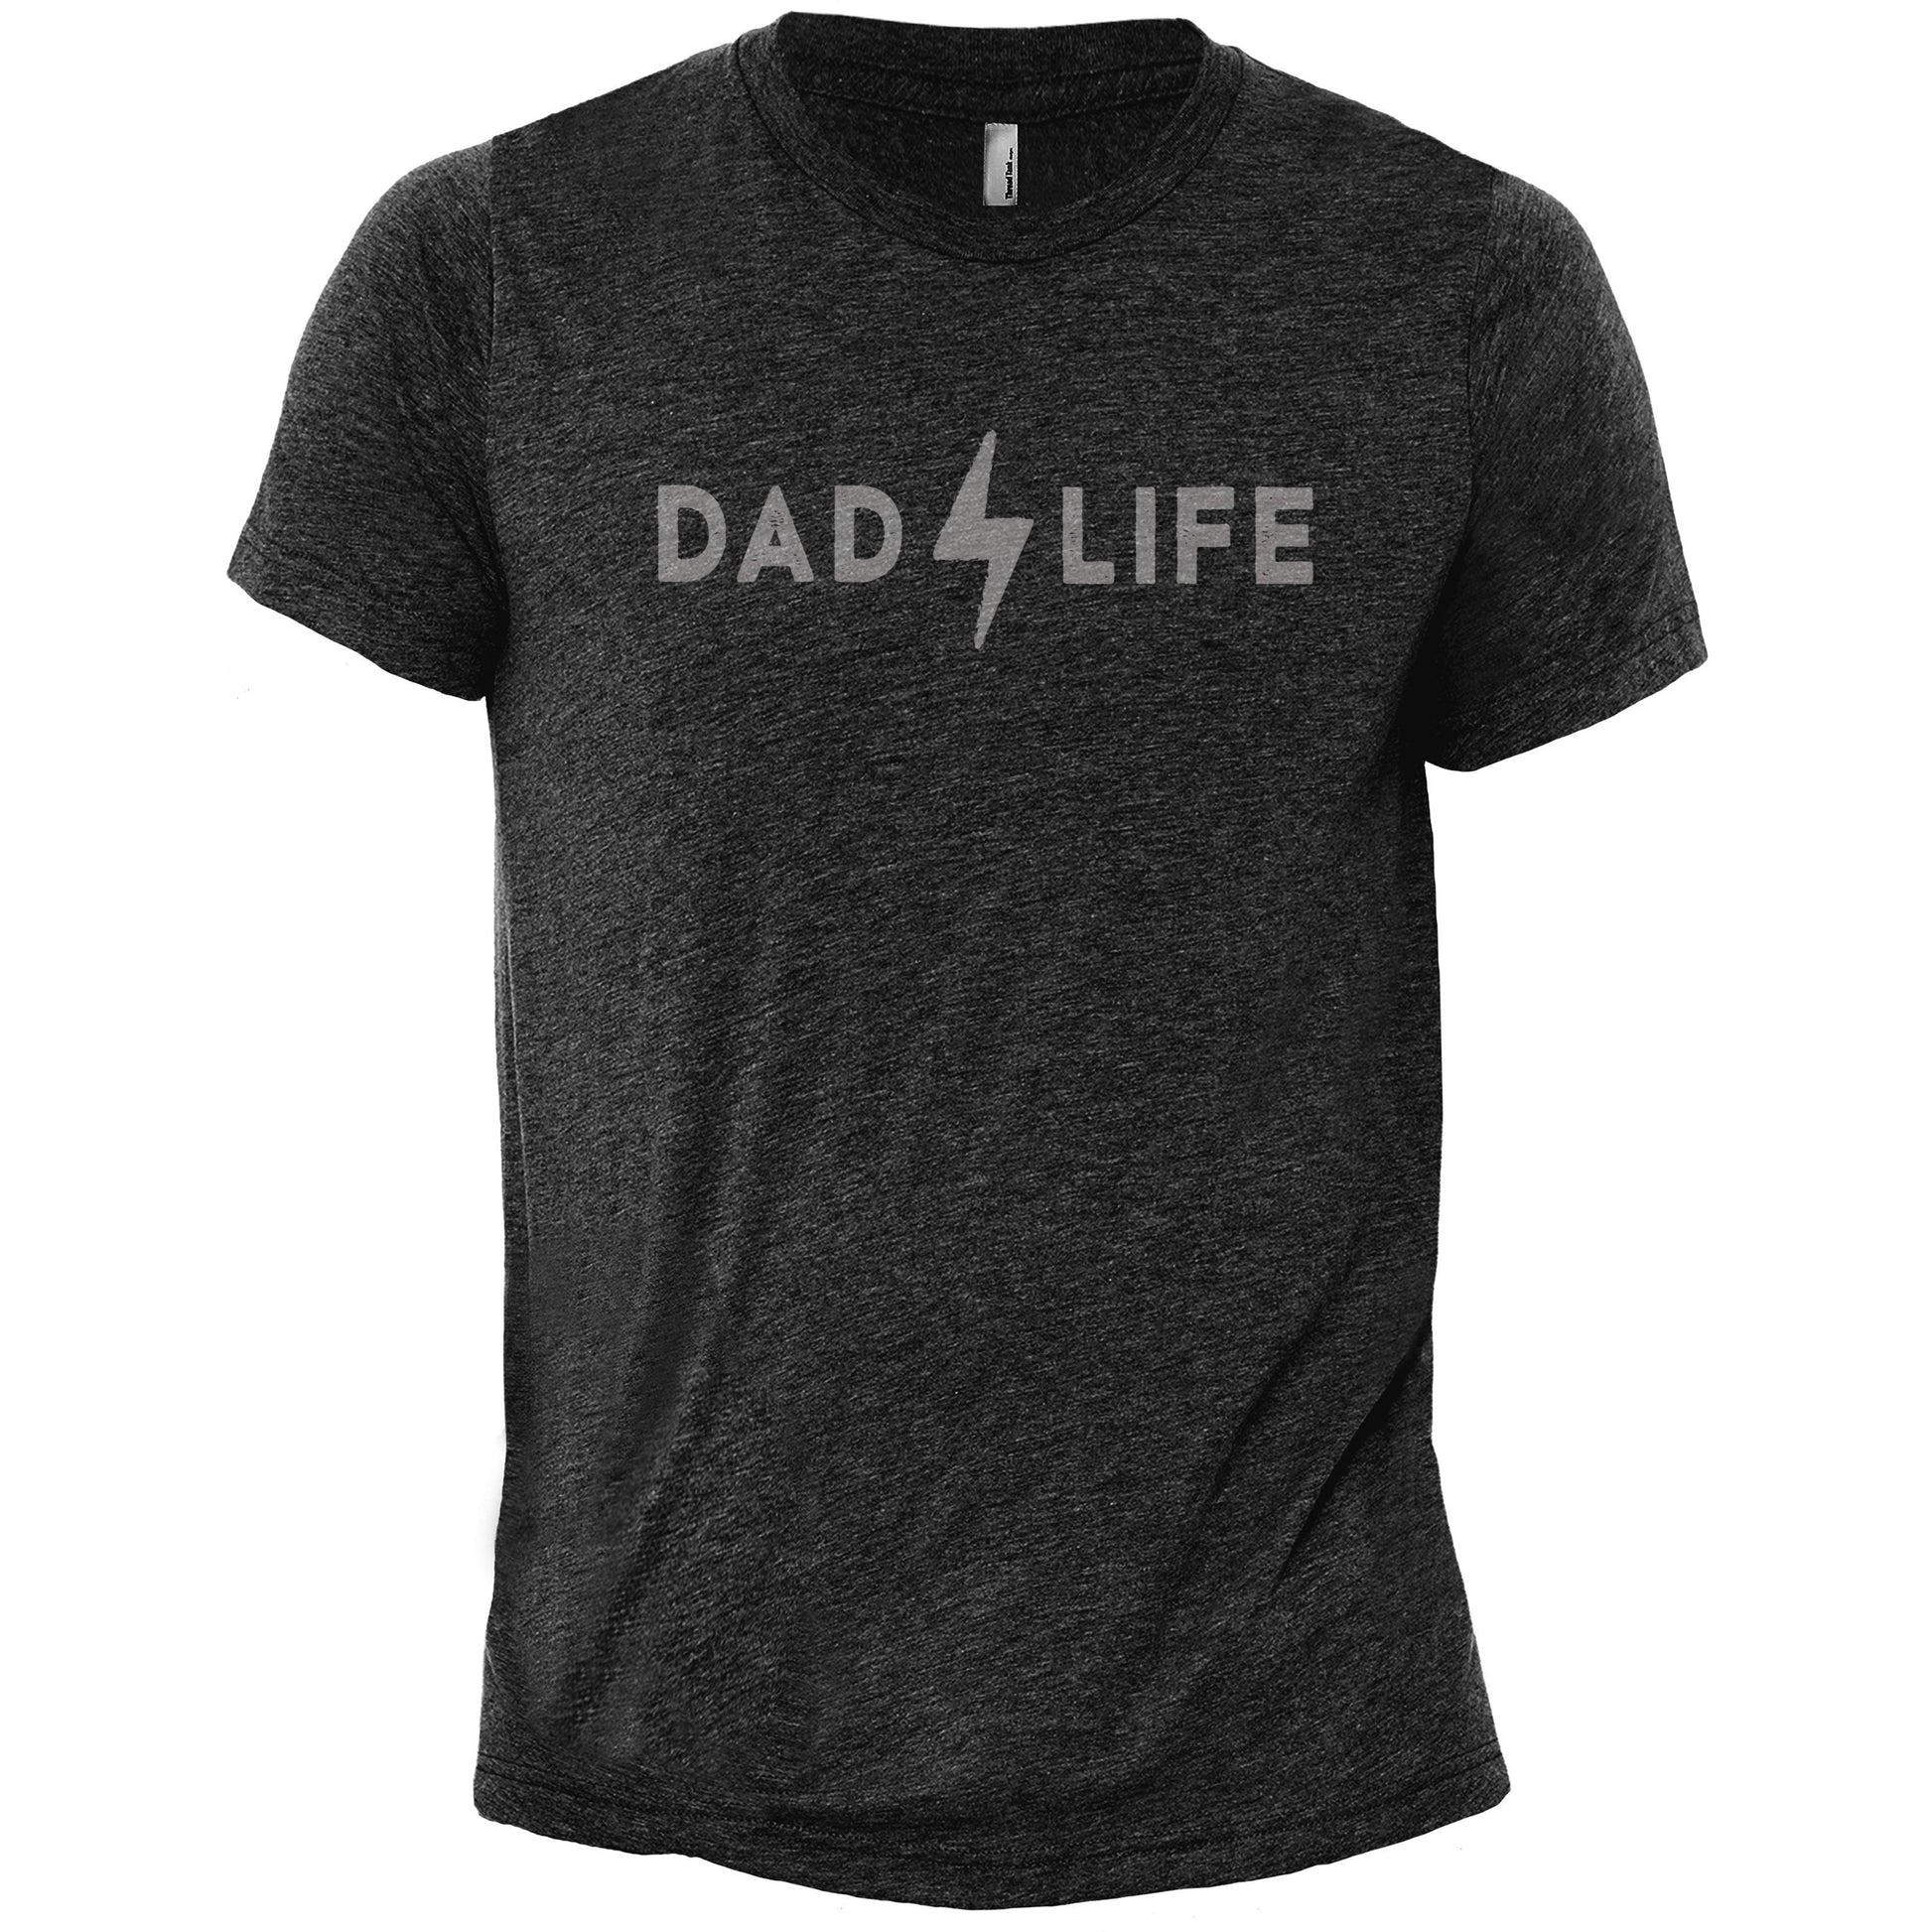 Dad Life - thread tank | Stories you can wear.